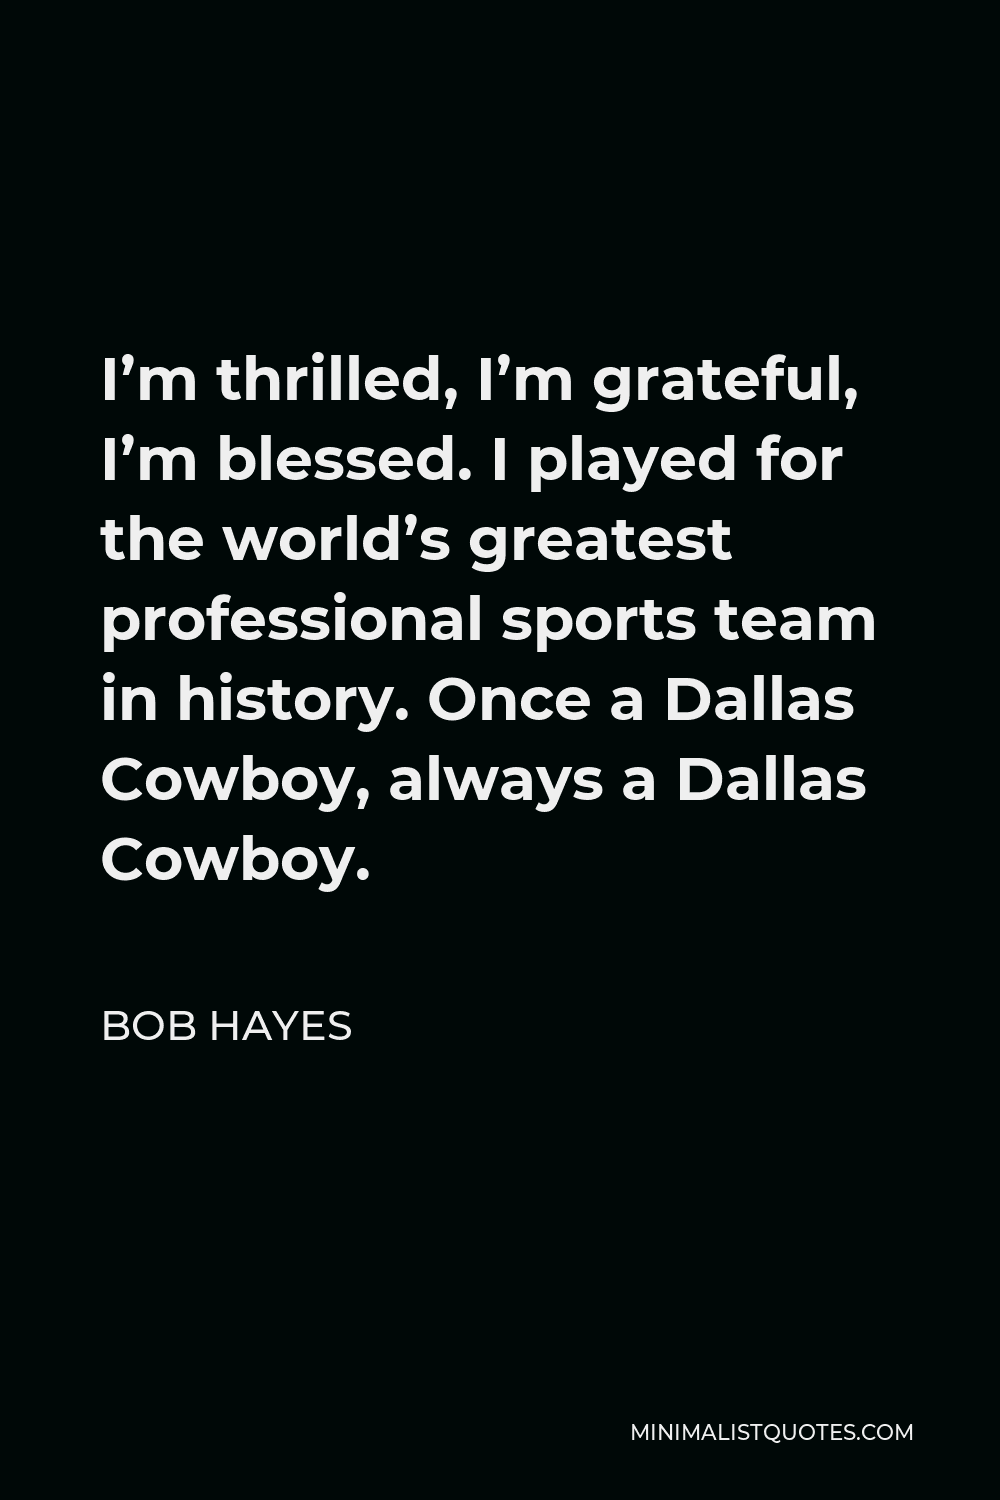 Bob Hayes Quote - I’m thrilled, I’m grateful, I’m blessed. I played for the world’s greatest professional sports team in history. Once a Dallas Cowboy, always a Dallas Cowboy.